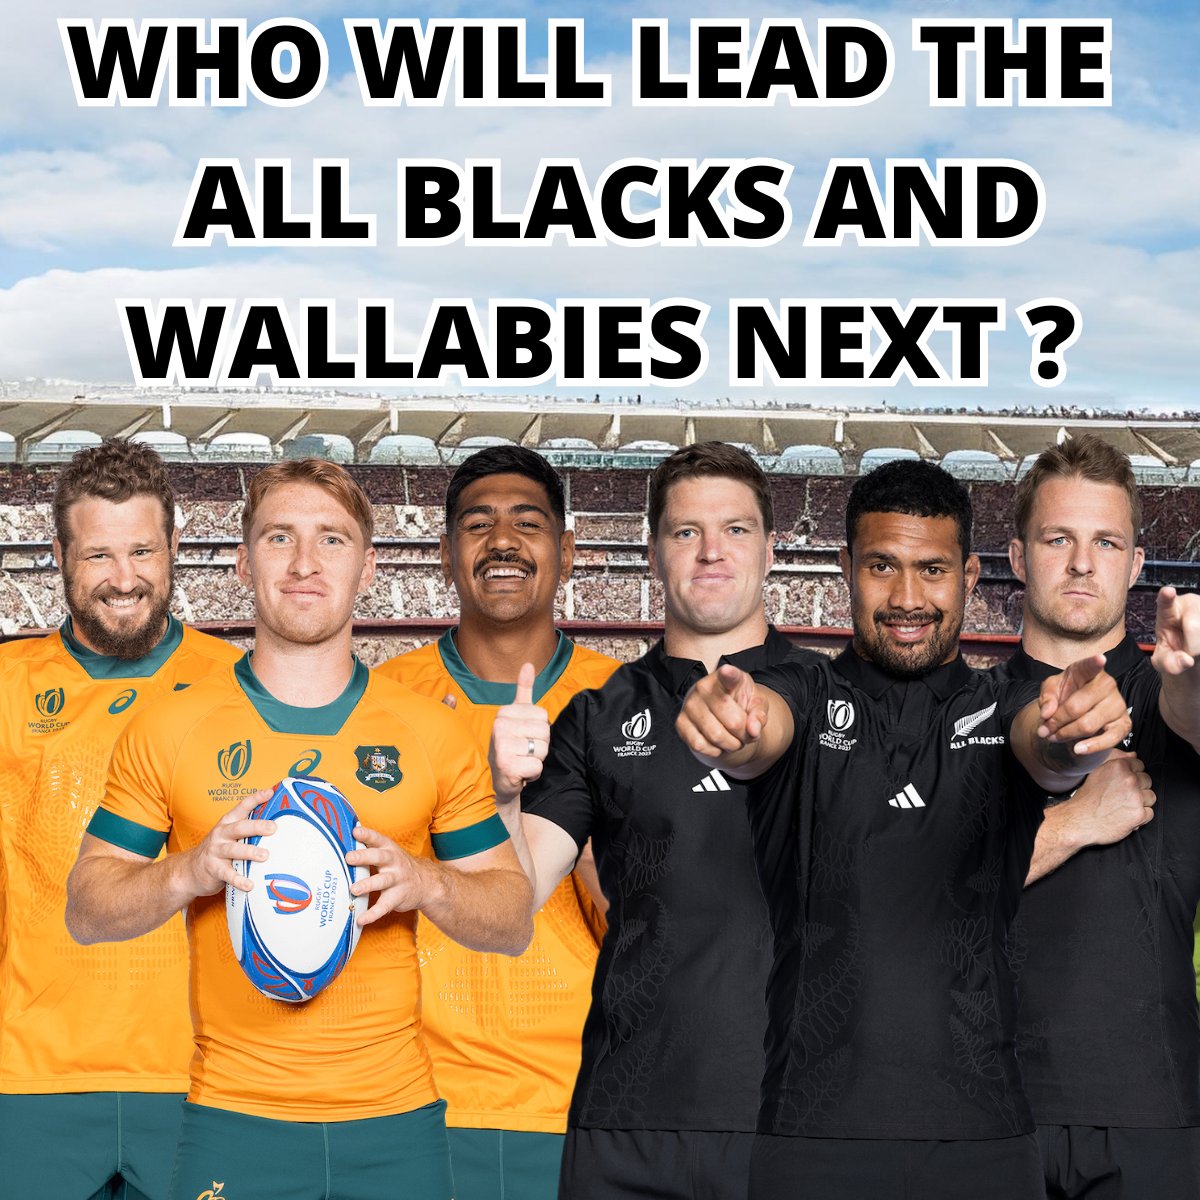 With the @AllBlacks and @wallabies starting new cycles under Scott Robertson and Joe Schmidt, who should captain from 2024? @TheRugbyDao wants you to share your picks in the comments below ⬇️ #allblacks #wallabies #captain #rugby @W3SVentures